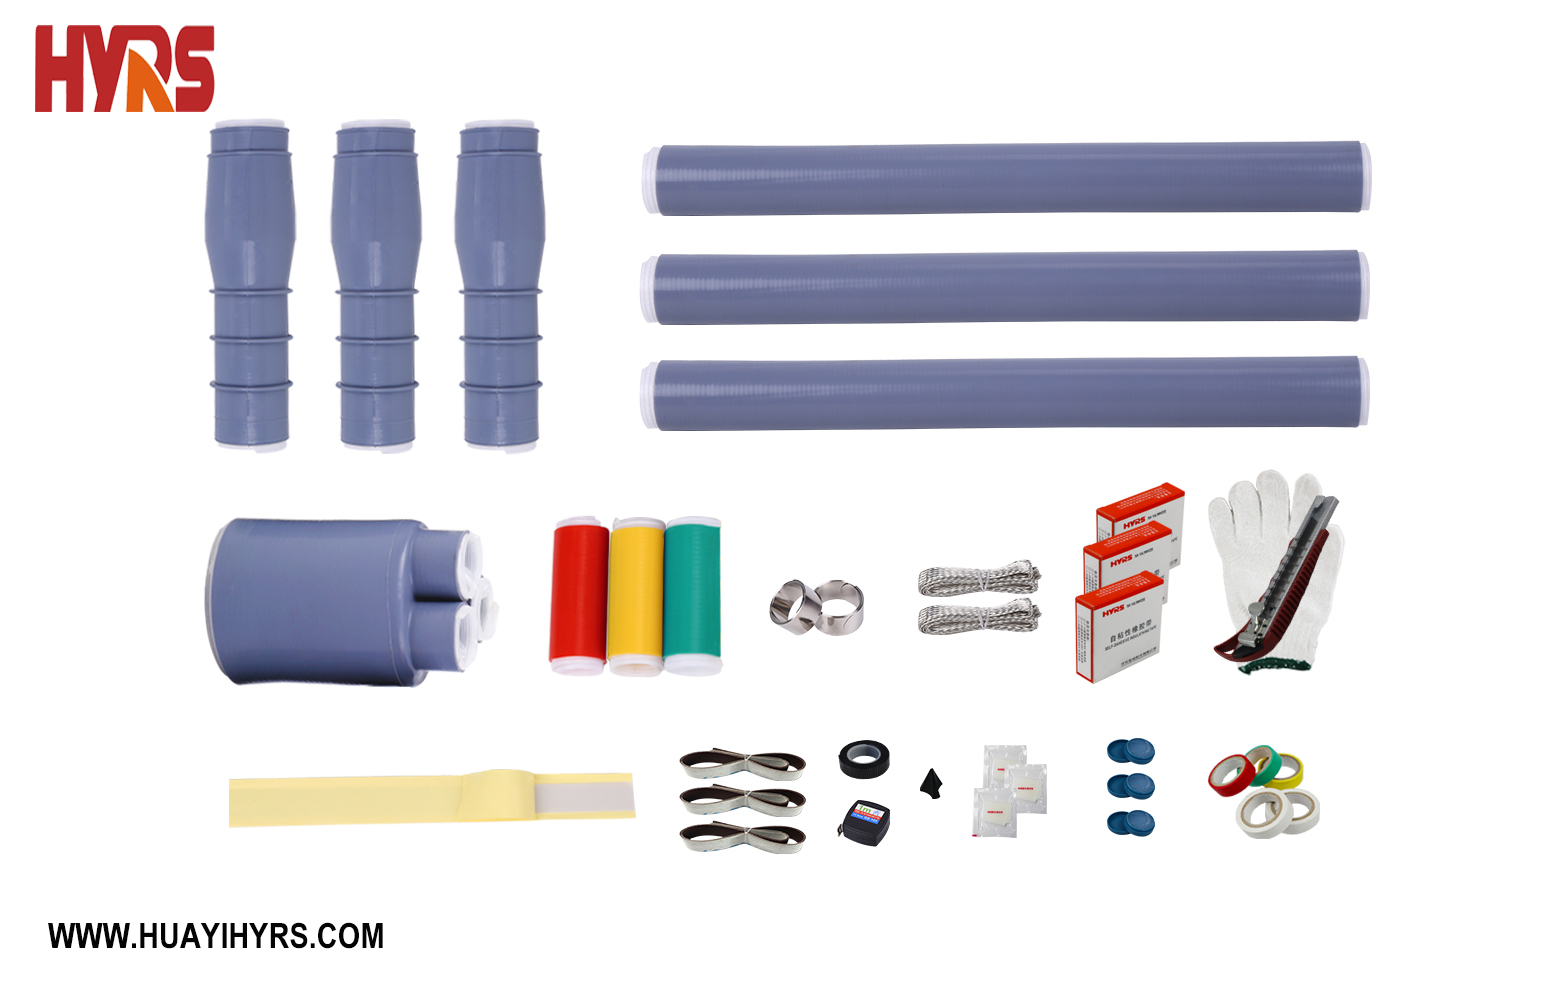 Classification of Medium Voltage Cable Termination Kit